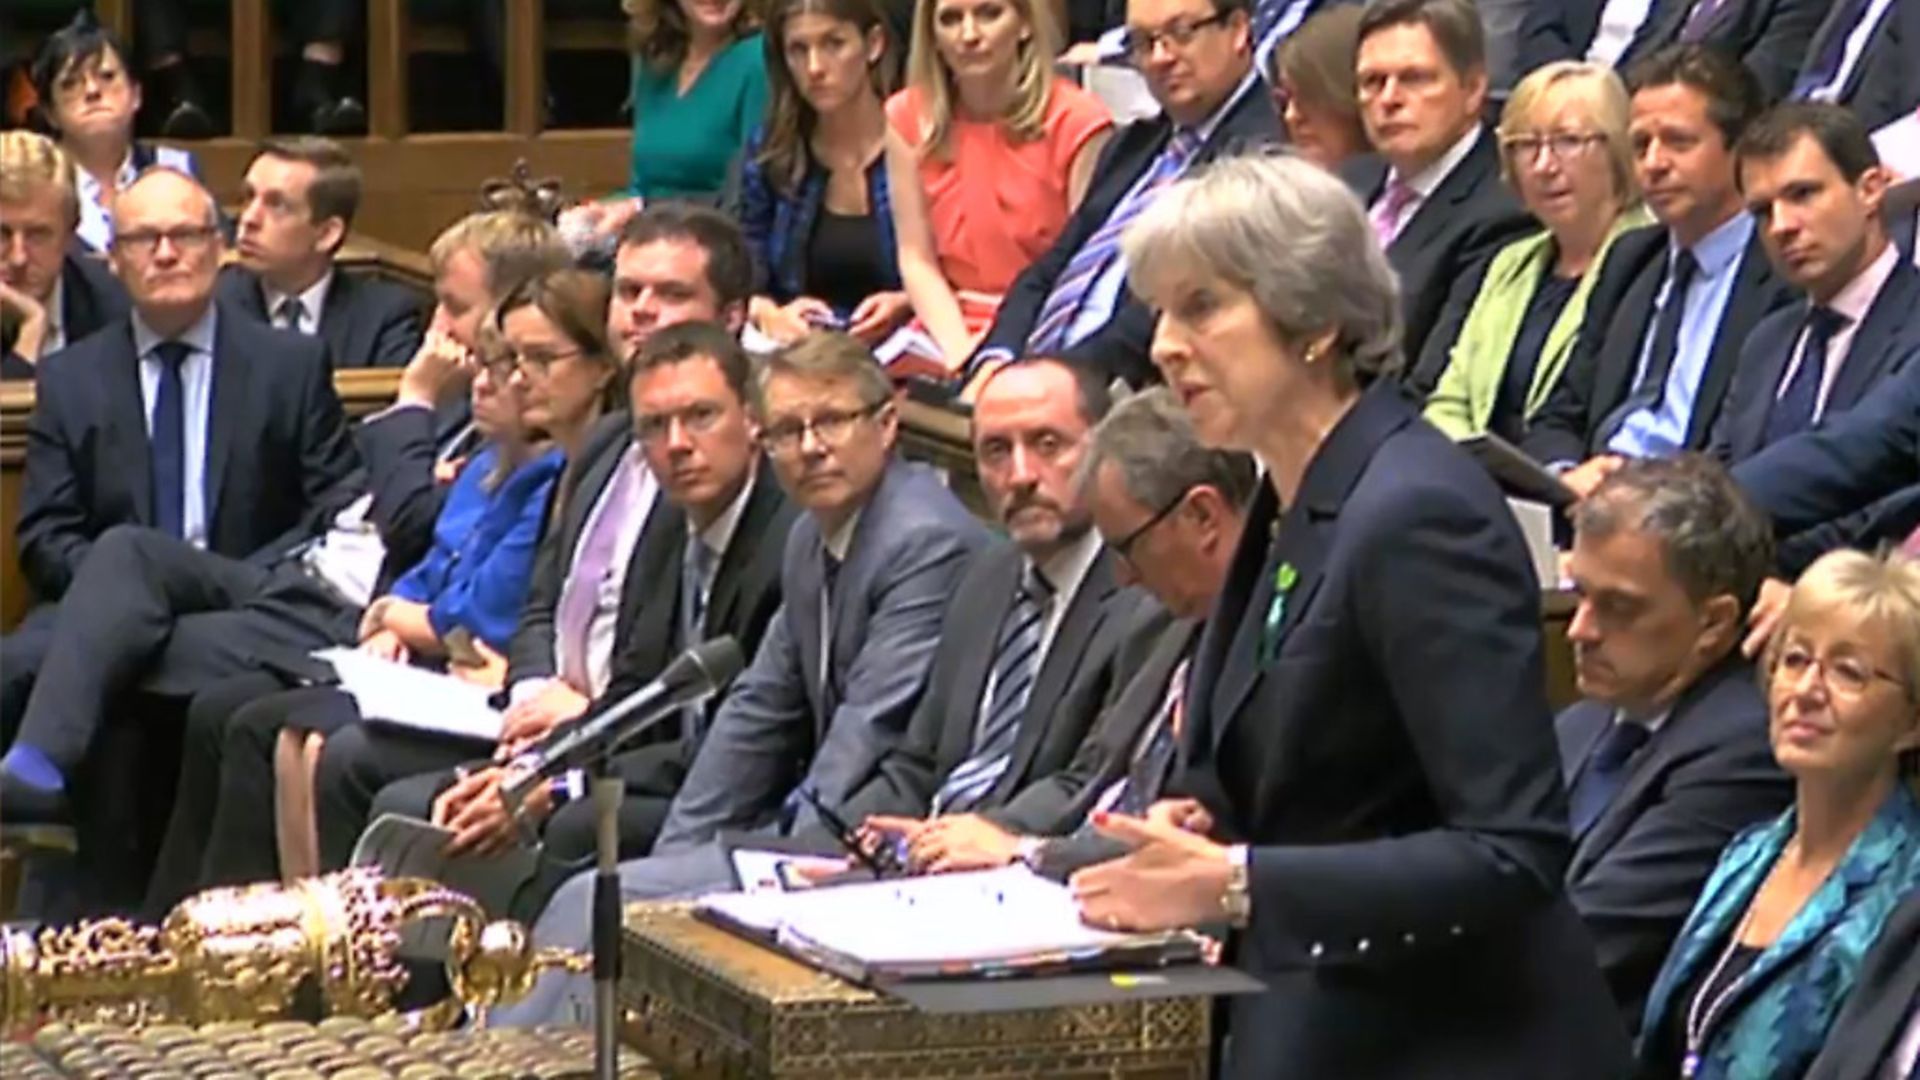 Prime Minister Theresa May speaks during Prime Minister's Questions. Photograph: PA - Credit: PA Wire/PA Images